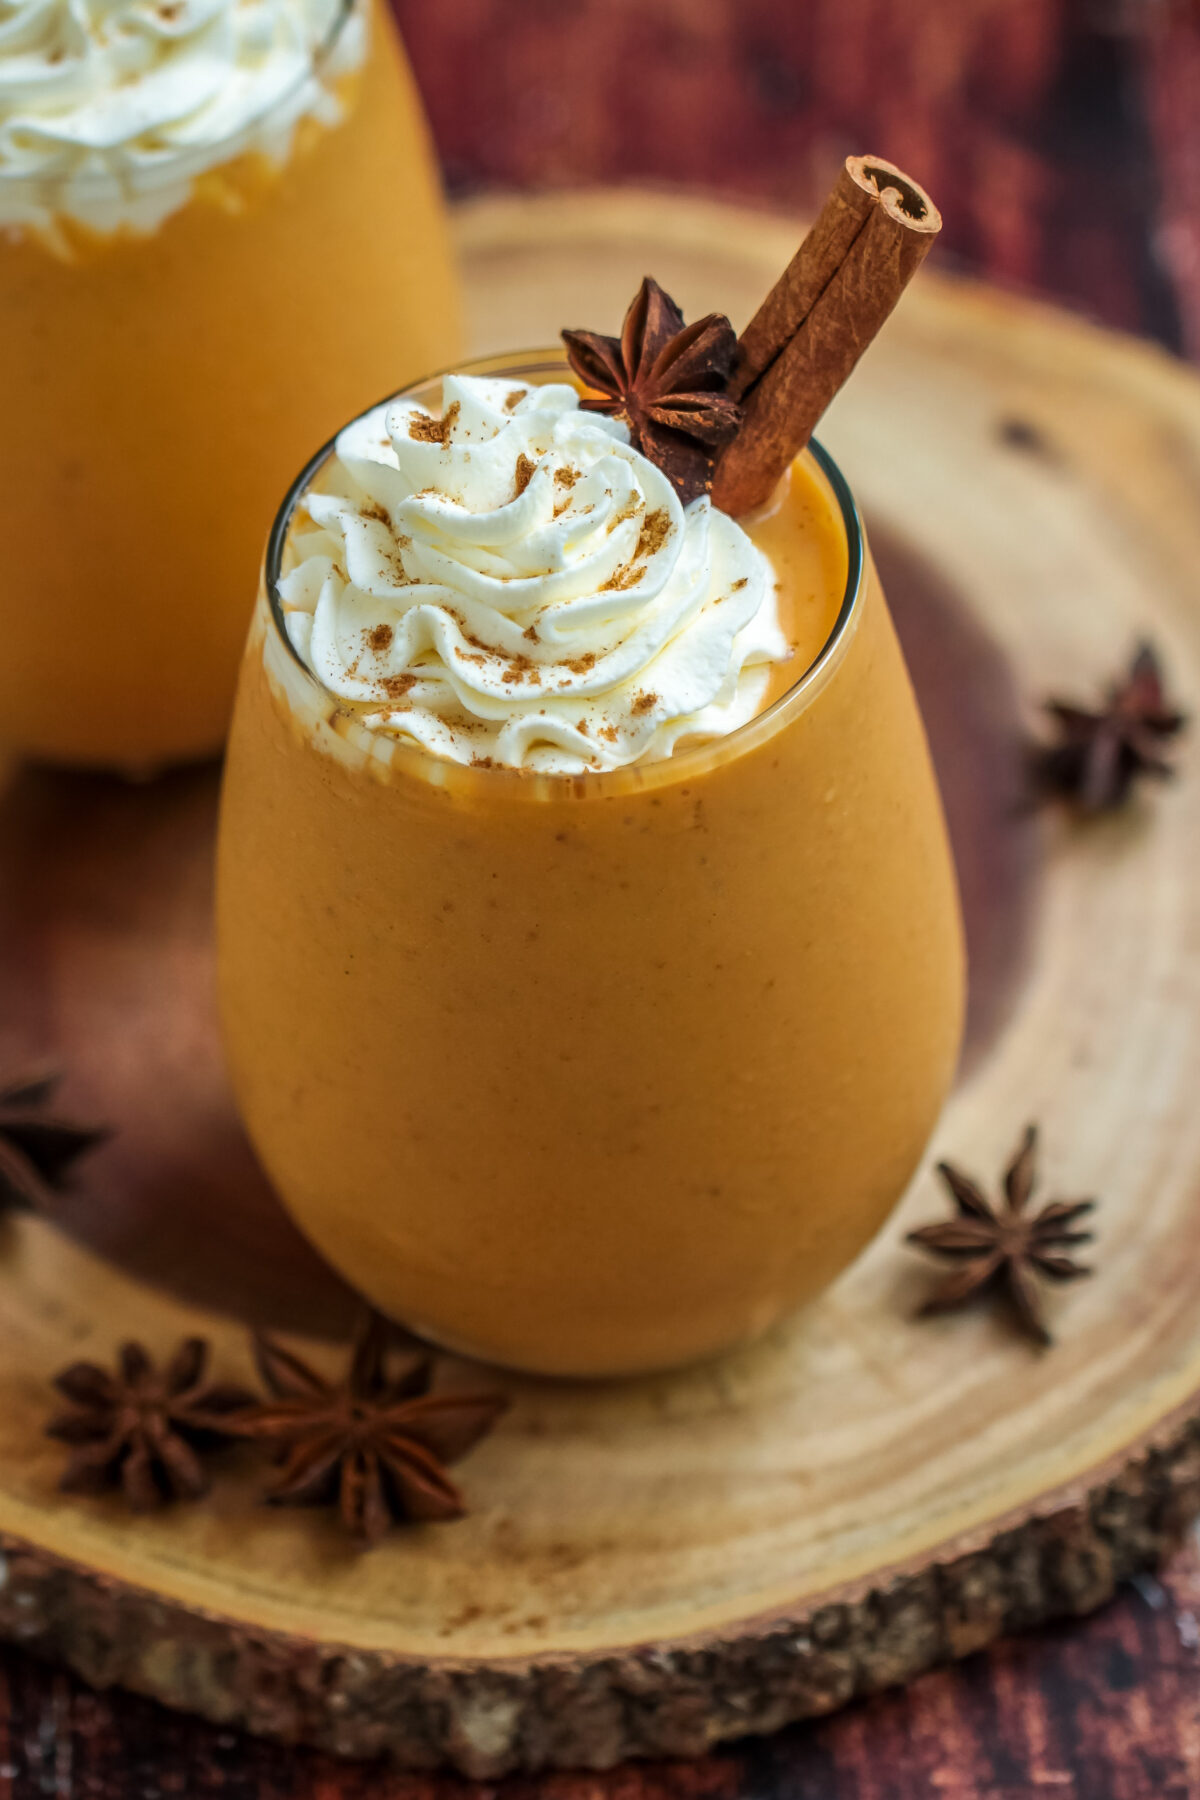 This healthy pumpkin pie smoothie is a great way to use up leftover canned pumpkin puree from Thanksgiving. A delicious fall treat!